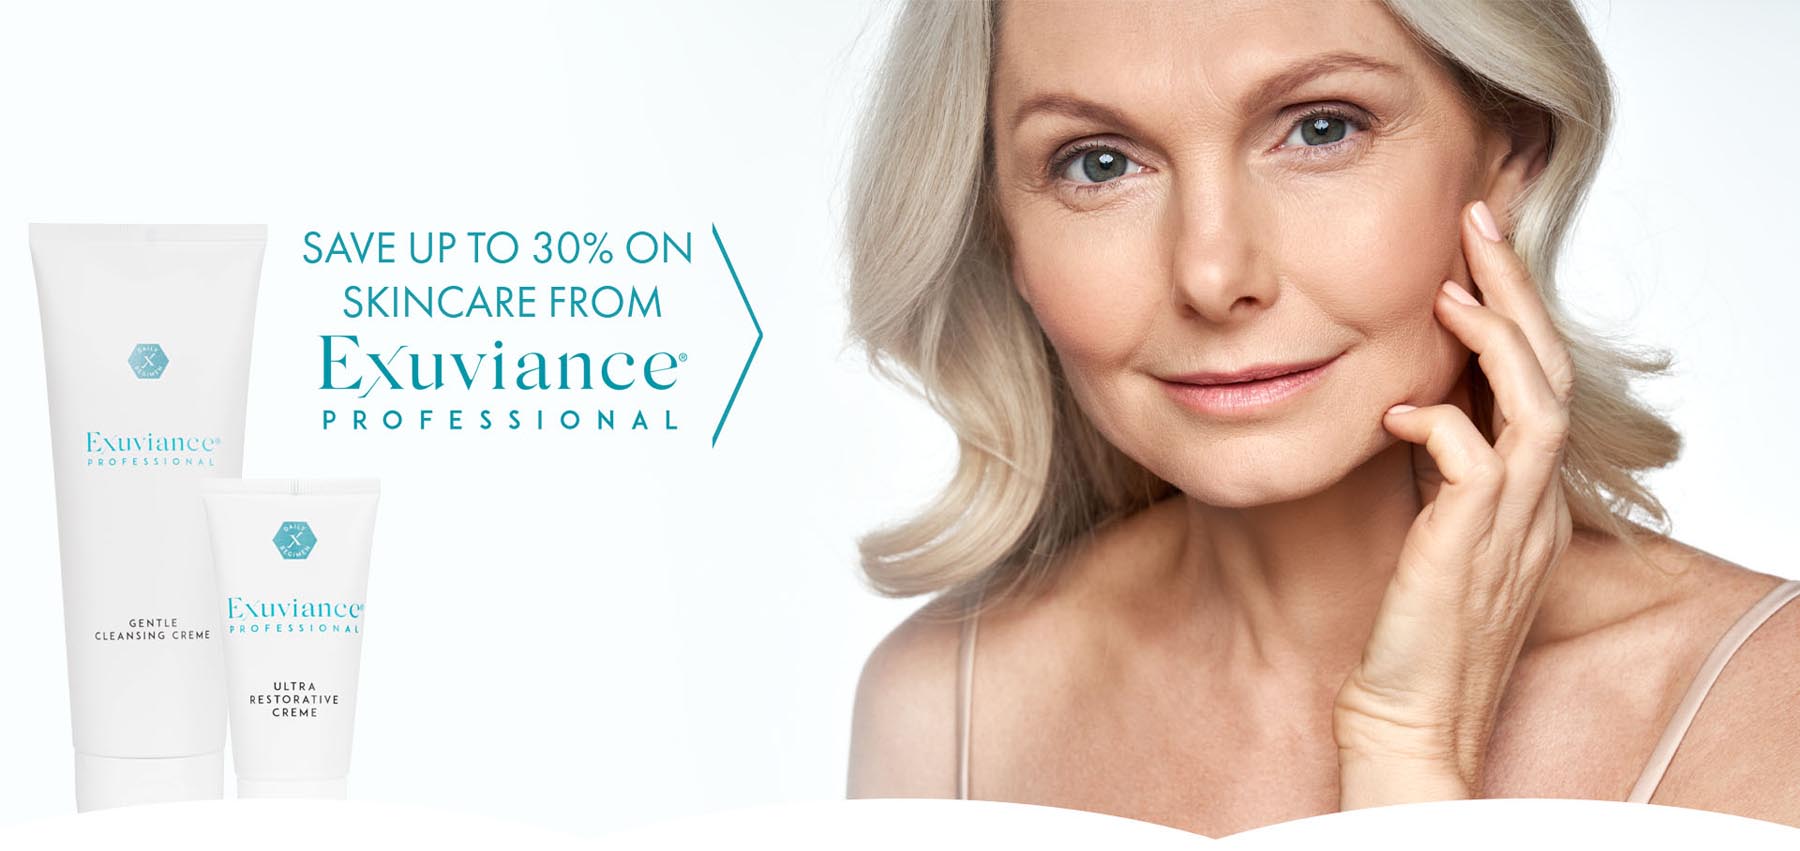 Save up to 30% on skincare from Exuviance